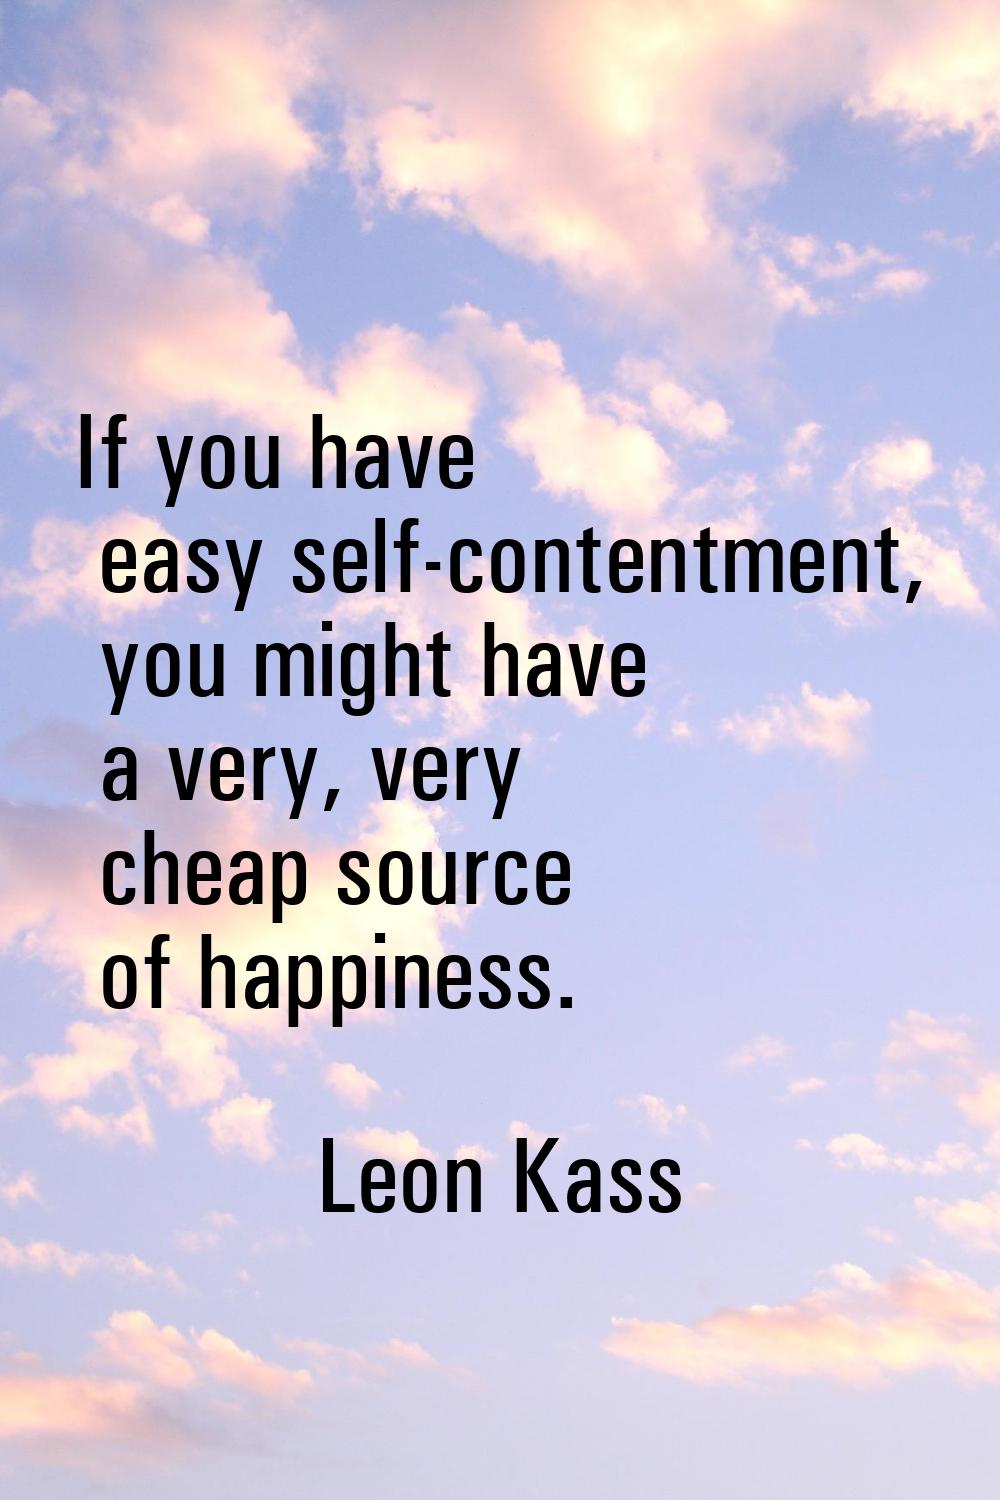 If you have easy self-contentment, you might have a very, very cheap source of happiness.